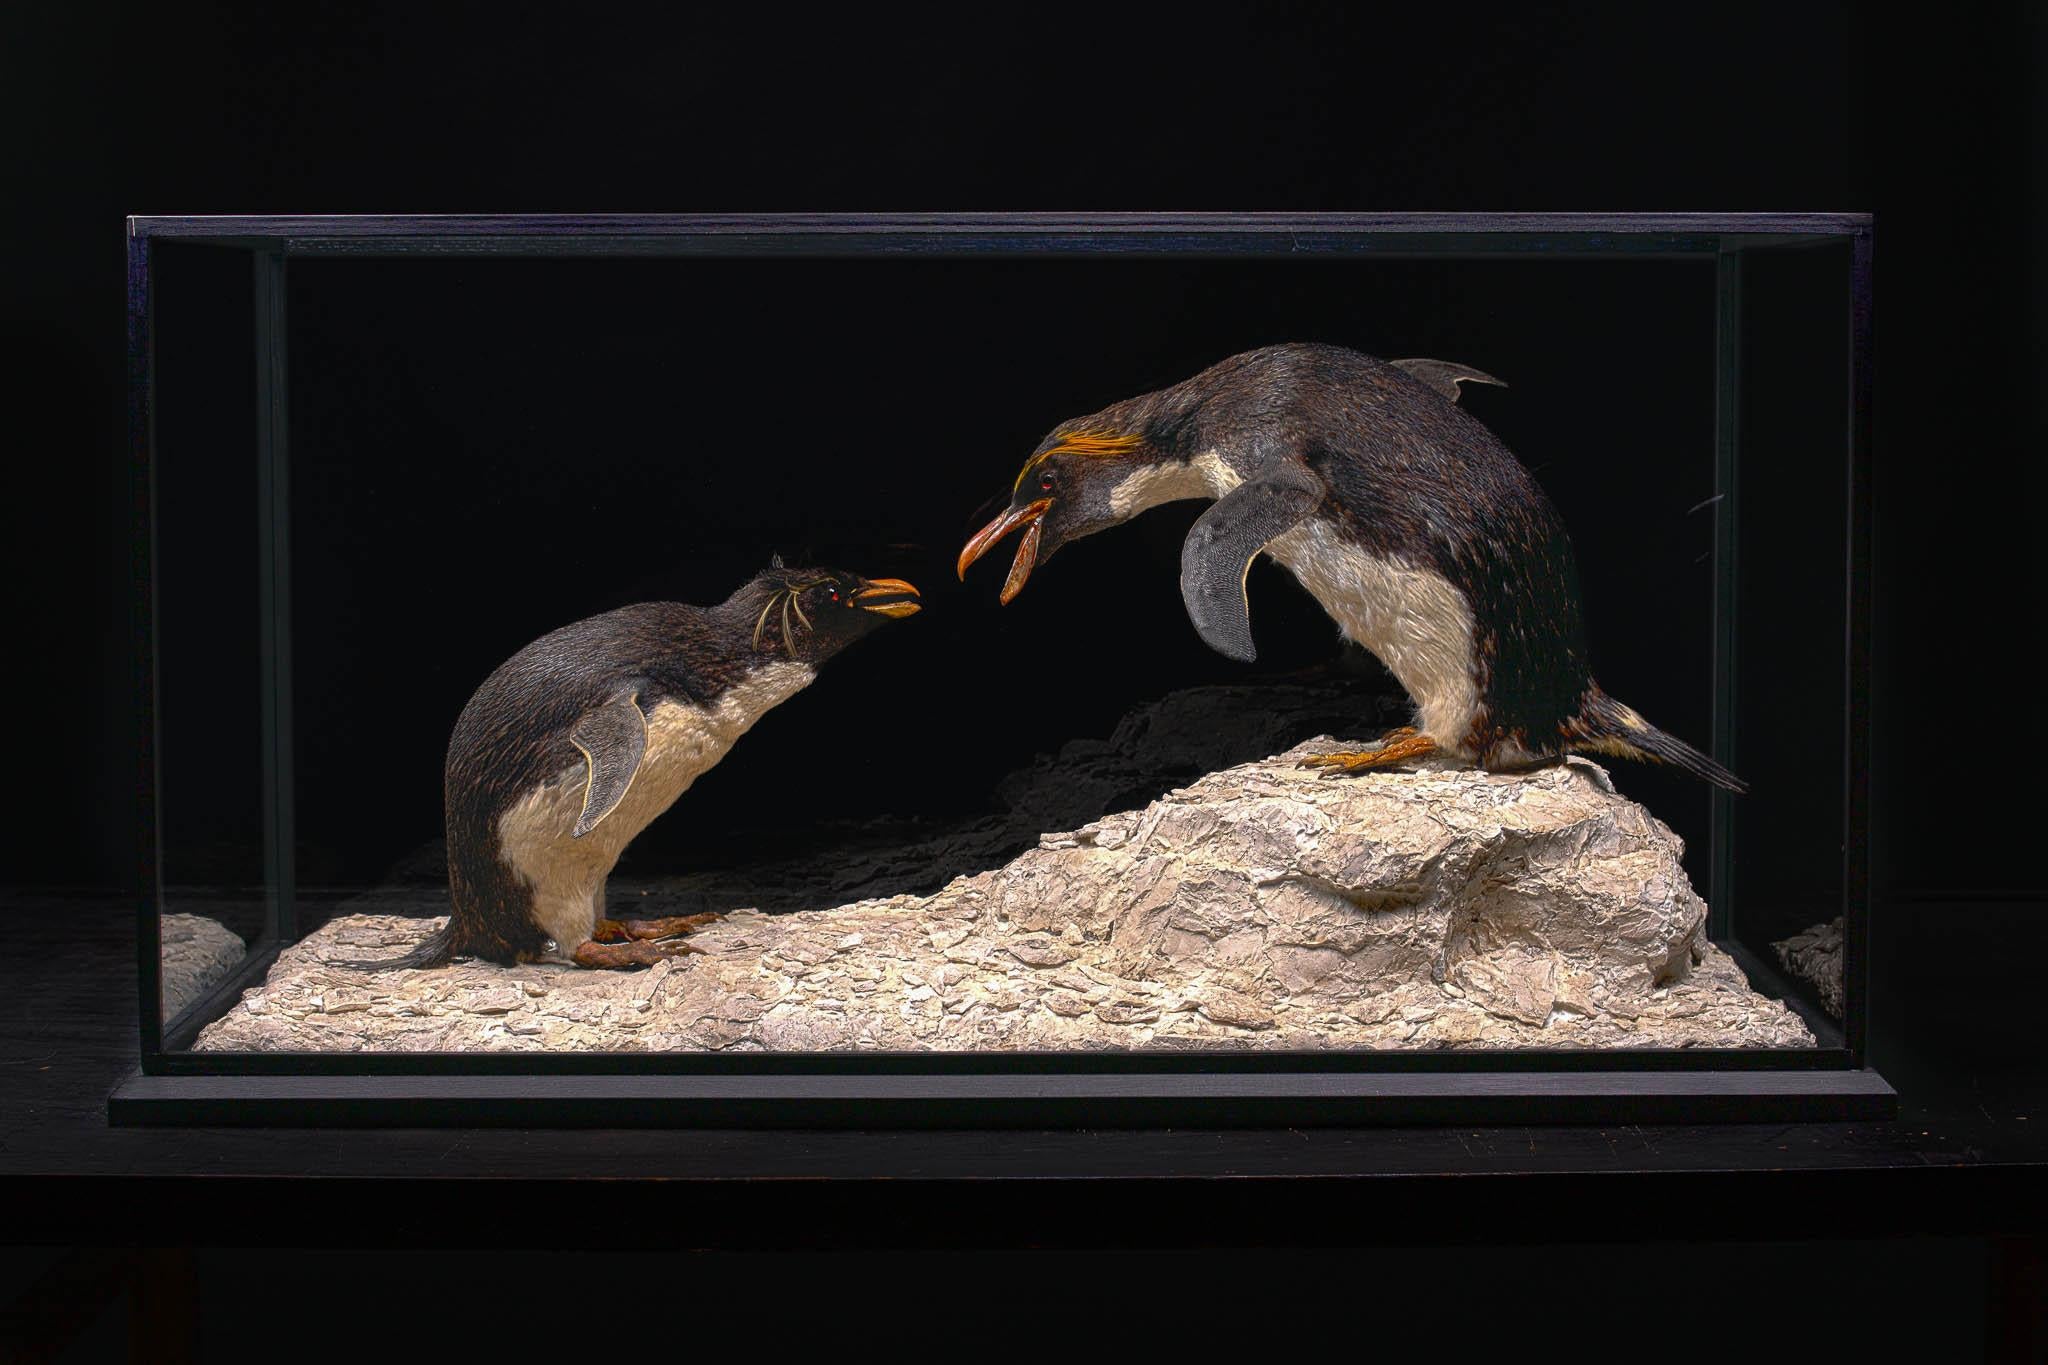 The birds (Eudyptes chrysolophus NR & Eudyptes chrysocome NR). were collected by the Mission Paul-Emile Victor in 1984 Terres Australes et Antarctiques Françaises and the diorama was newly created.